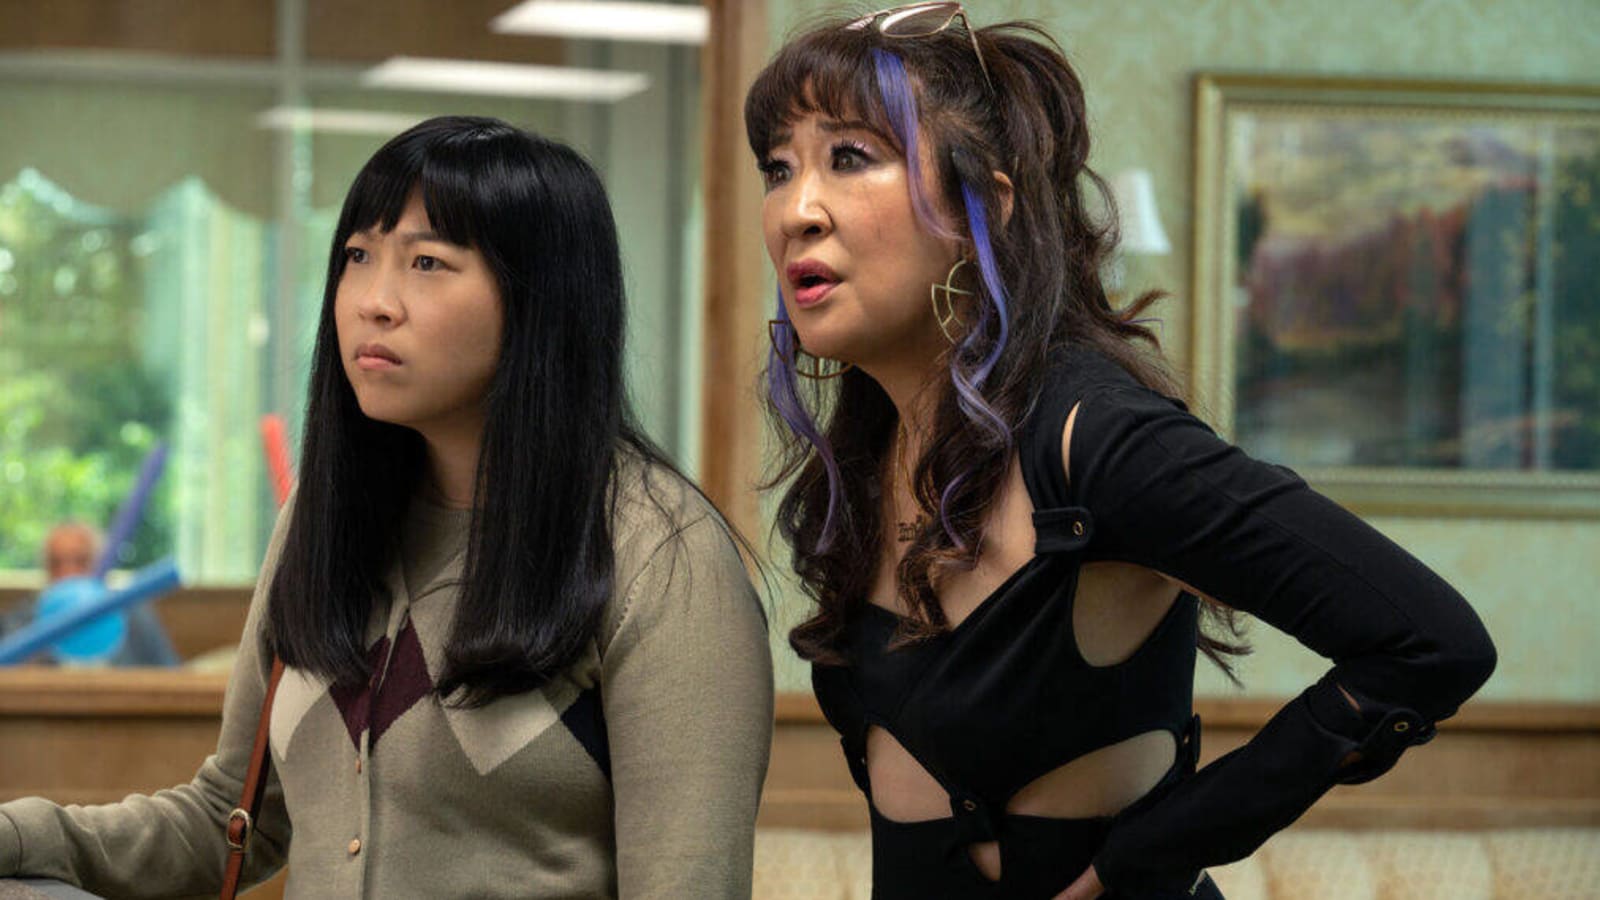 ‘Quiz Lady’: Sandra Oh & Awkwafina Play Polar Opposite Sisters in Hulu Comedy